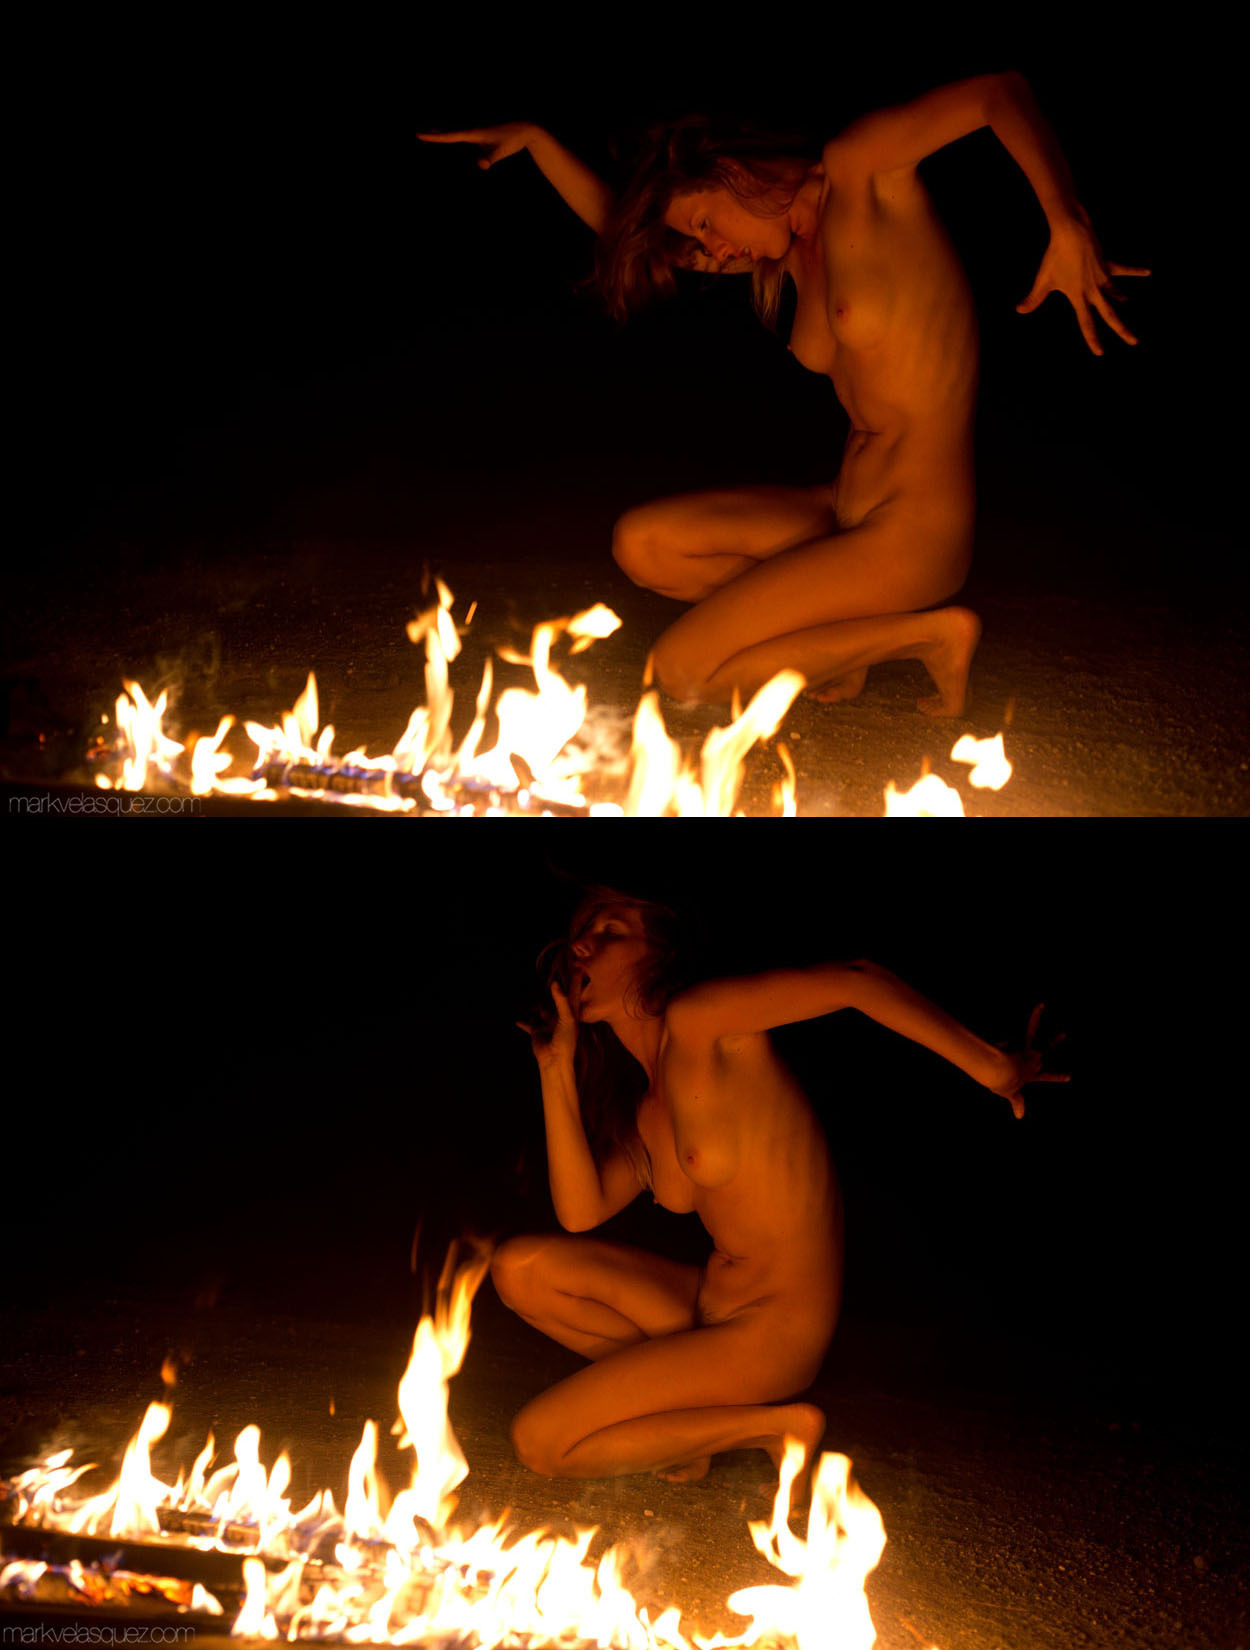 “Light My Fire,” 2015Find this never-shared series and all my uncensored photo